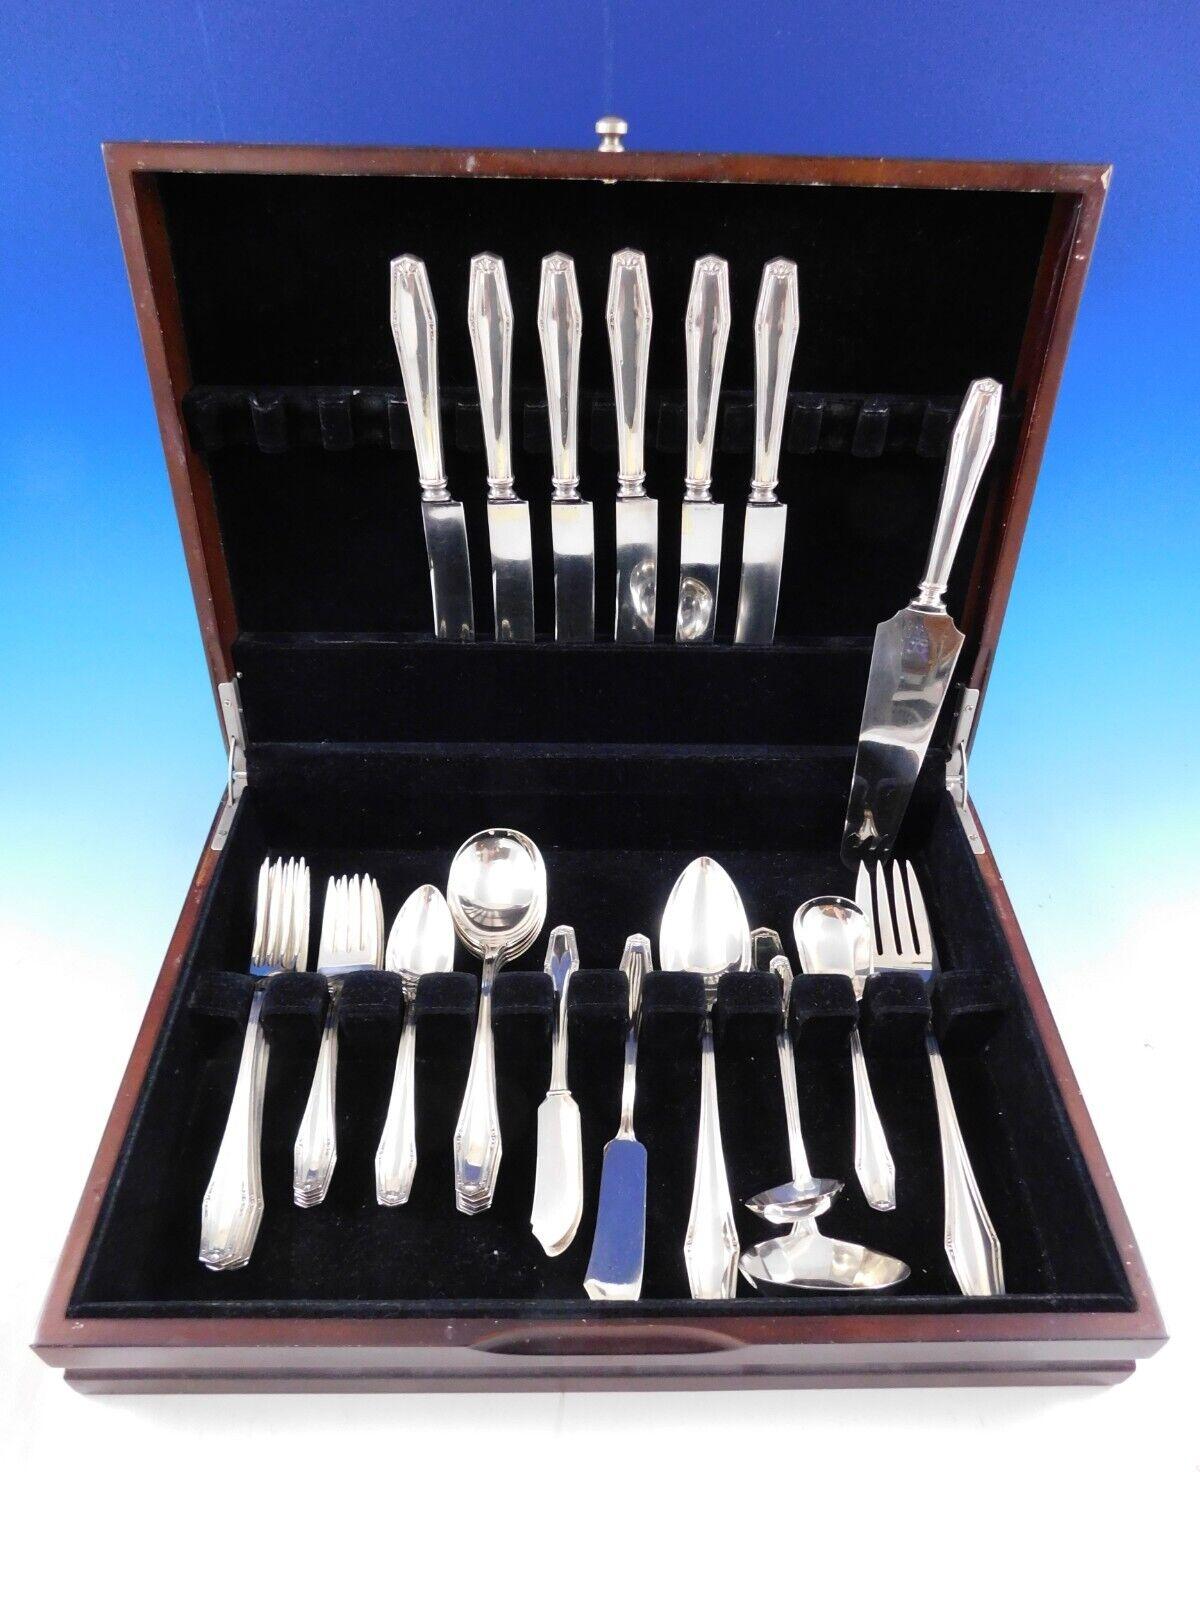 Art Deco Flanders-New by Alvin, circa 1923, sterling silver Flatware set, 43 pieces. This set includes:

6 Regular Knives, Blunt blades, 8 1/4